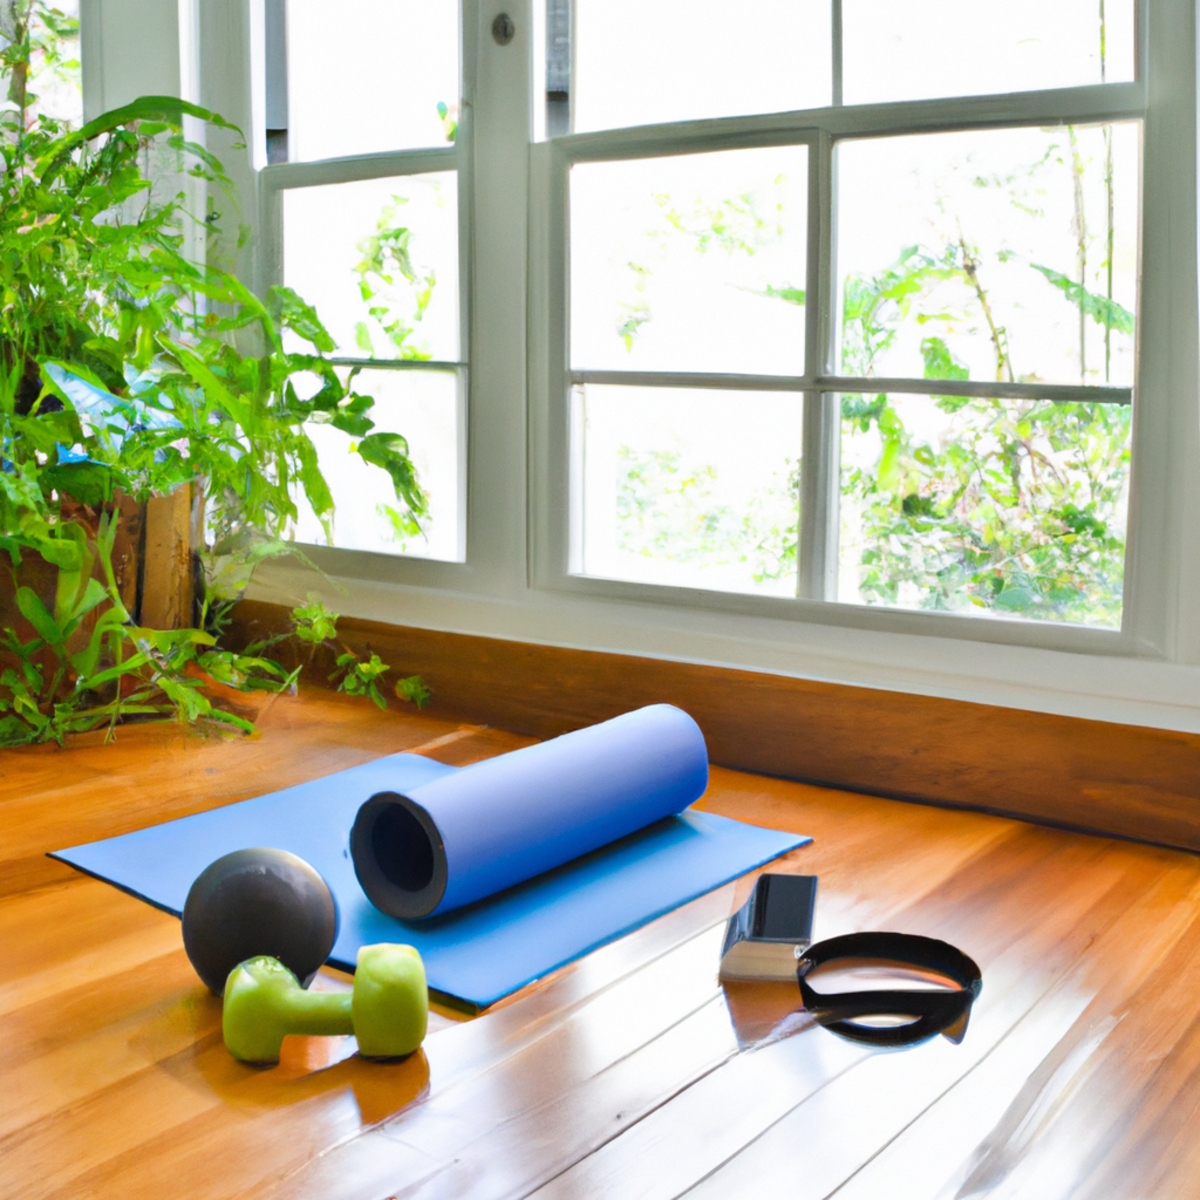 The photo features a wooden floor with a yoga mat laid out in the center. On the mat, there are various objects arranged neatly, including a resistance band, a small medicine ball, and a pair of dumbbells. The background shows a bright and airy room with large windows and green plants. The objects in the photo suggest a range of bodyweight exercises that can be done to improve core strength and stability, such as planks, Russian twists, and weighted sit-ups. The photo captures the essence of the article, which is to provide readers with effective exercises that can be done at home without the need for expensive gym equipment.